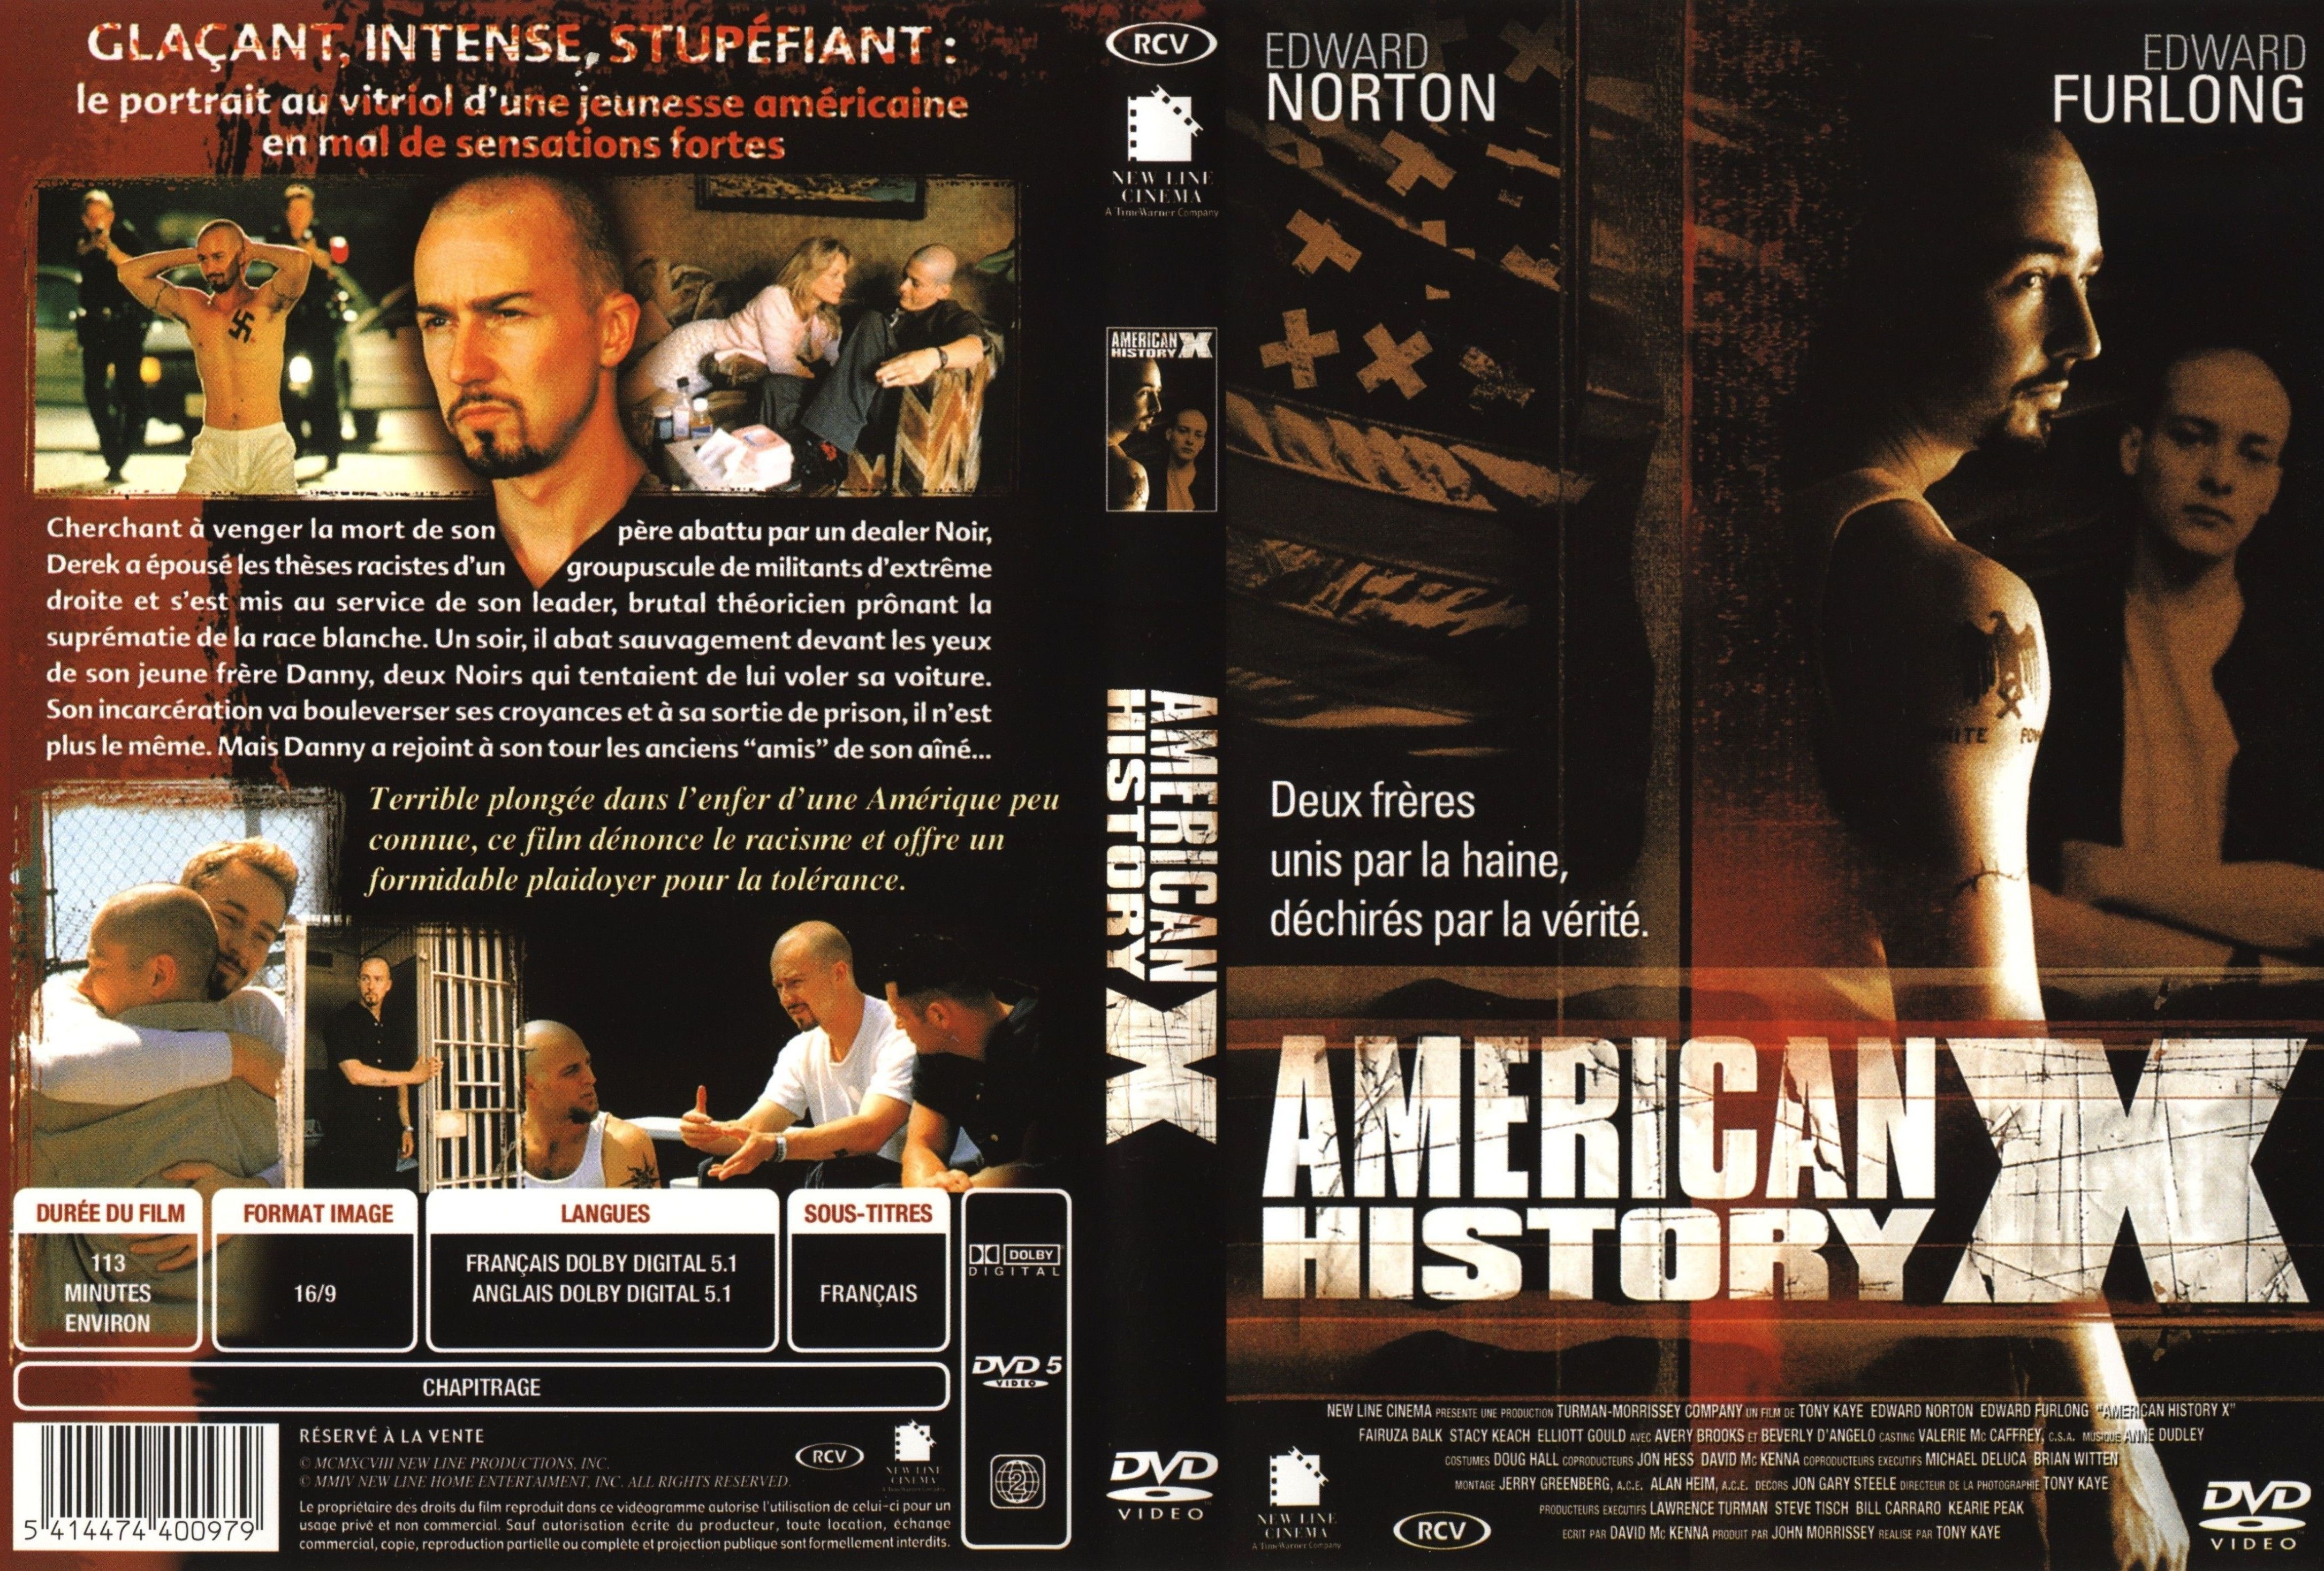 Jaquette DVD American history X v2